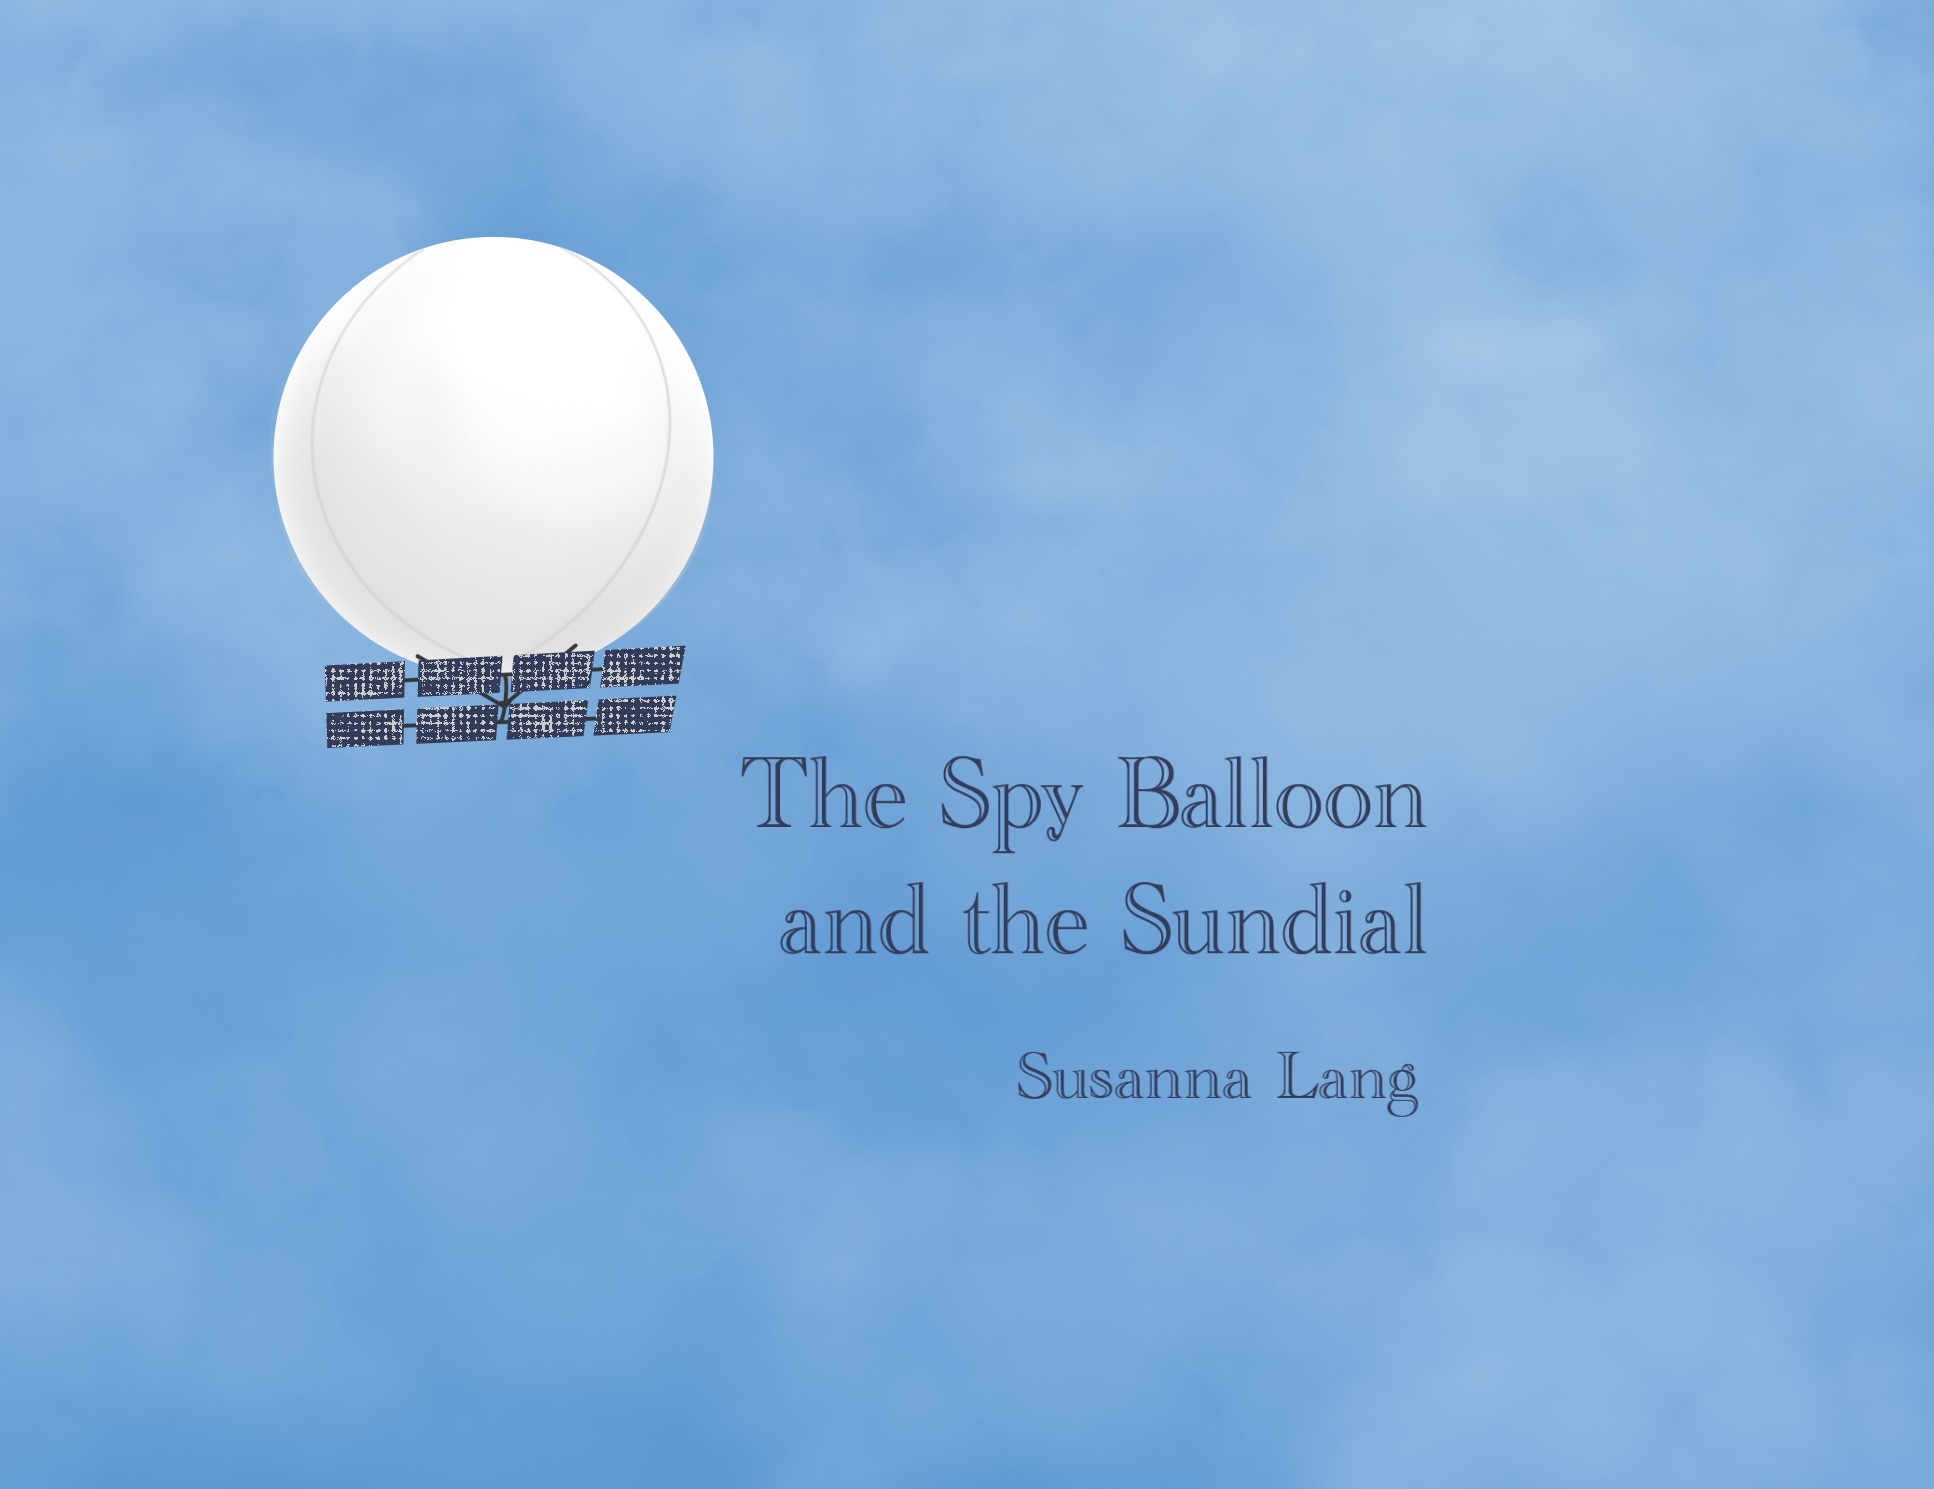 The Spy Balloon and the Sundial by Susanna Lang